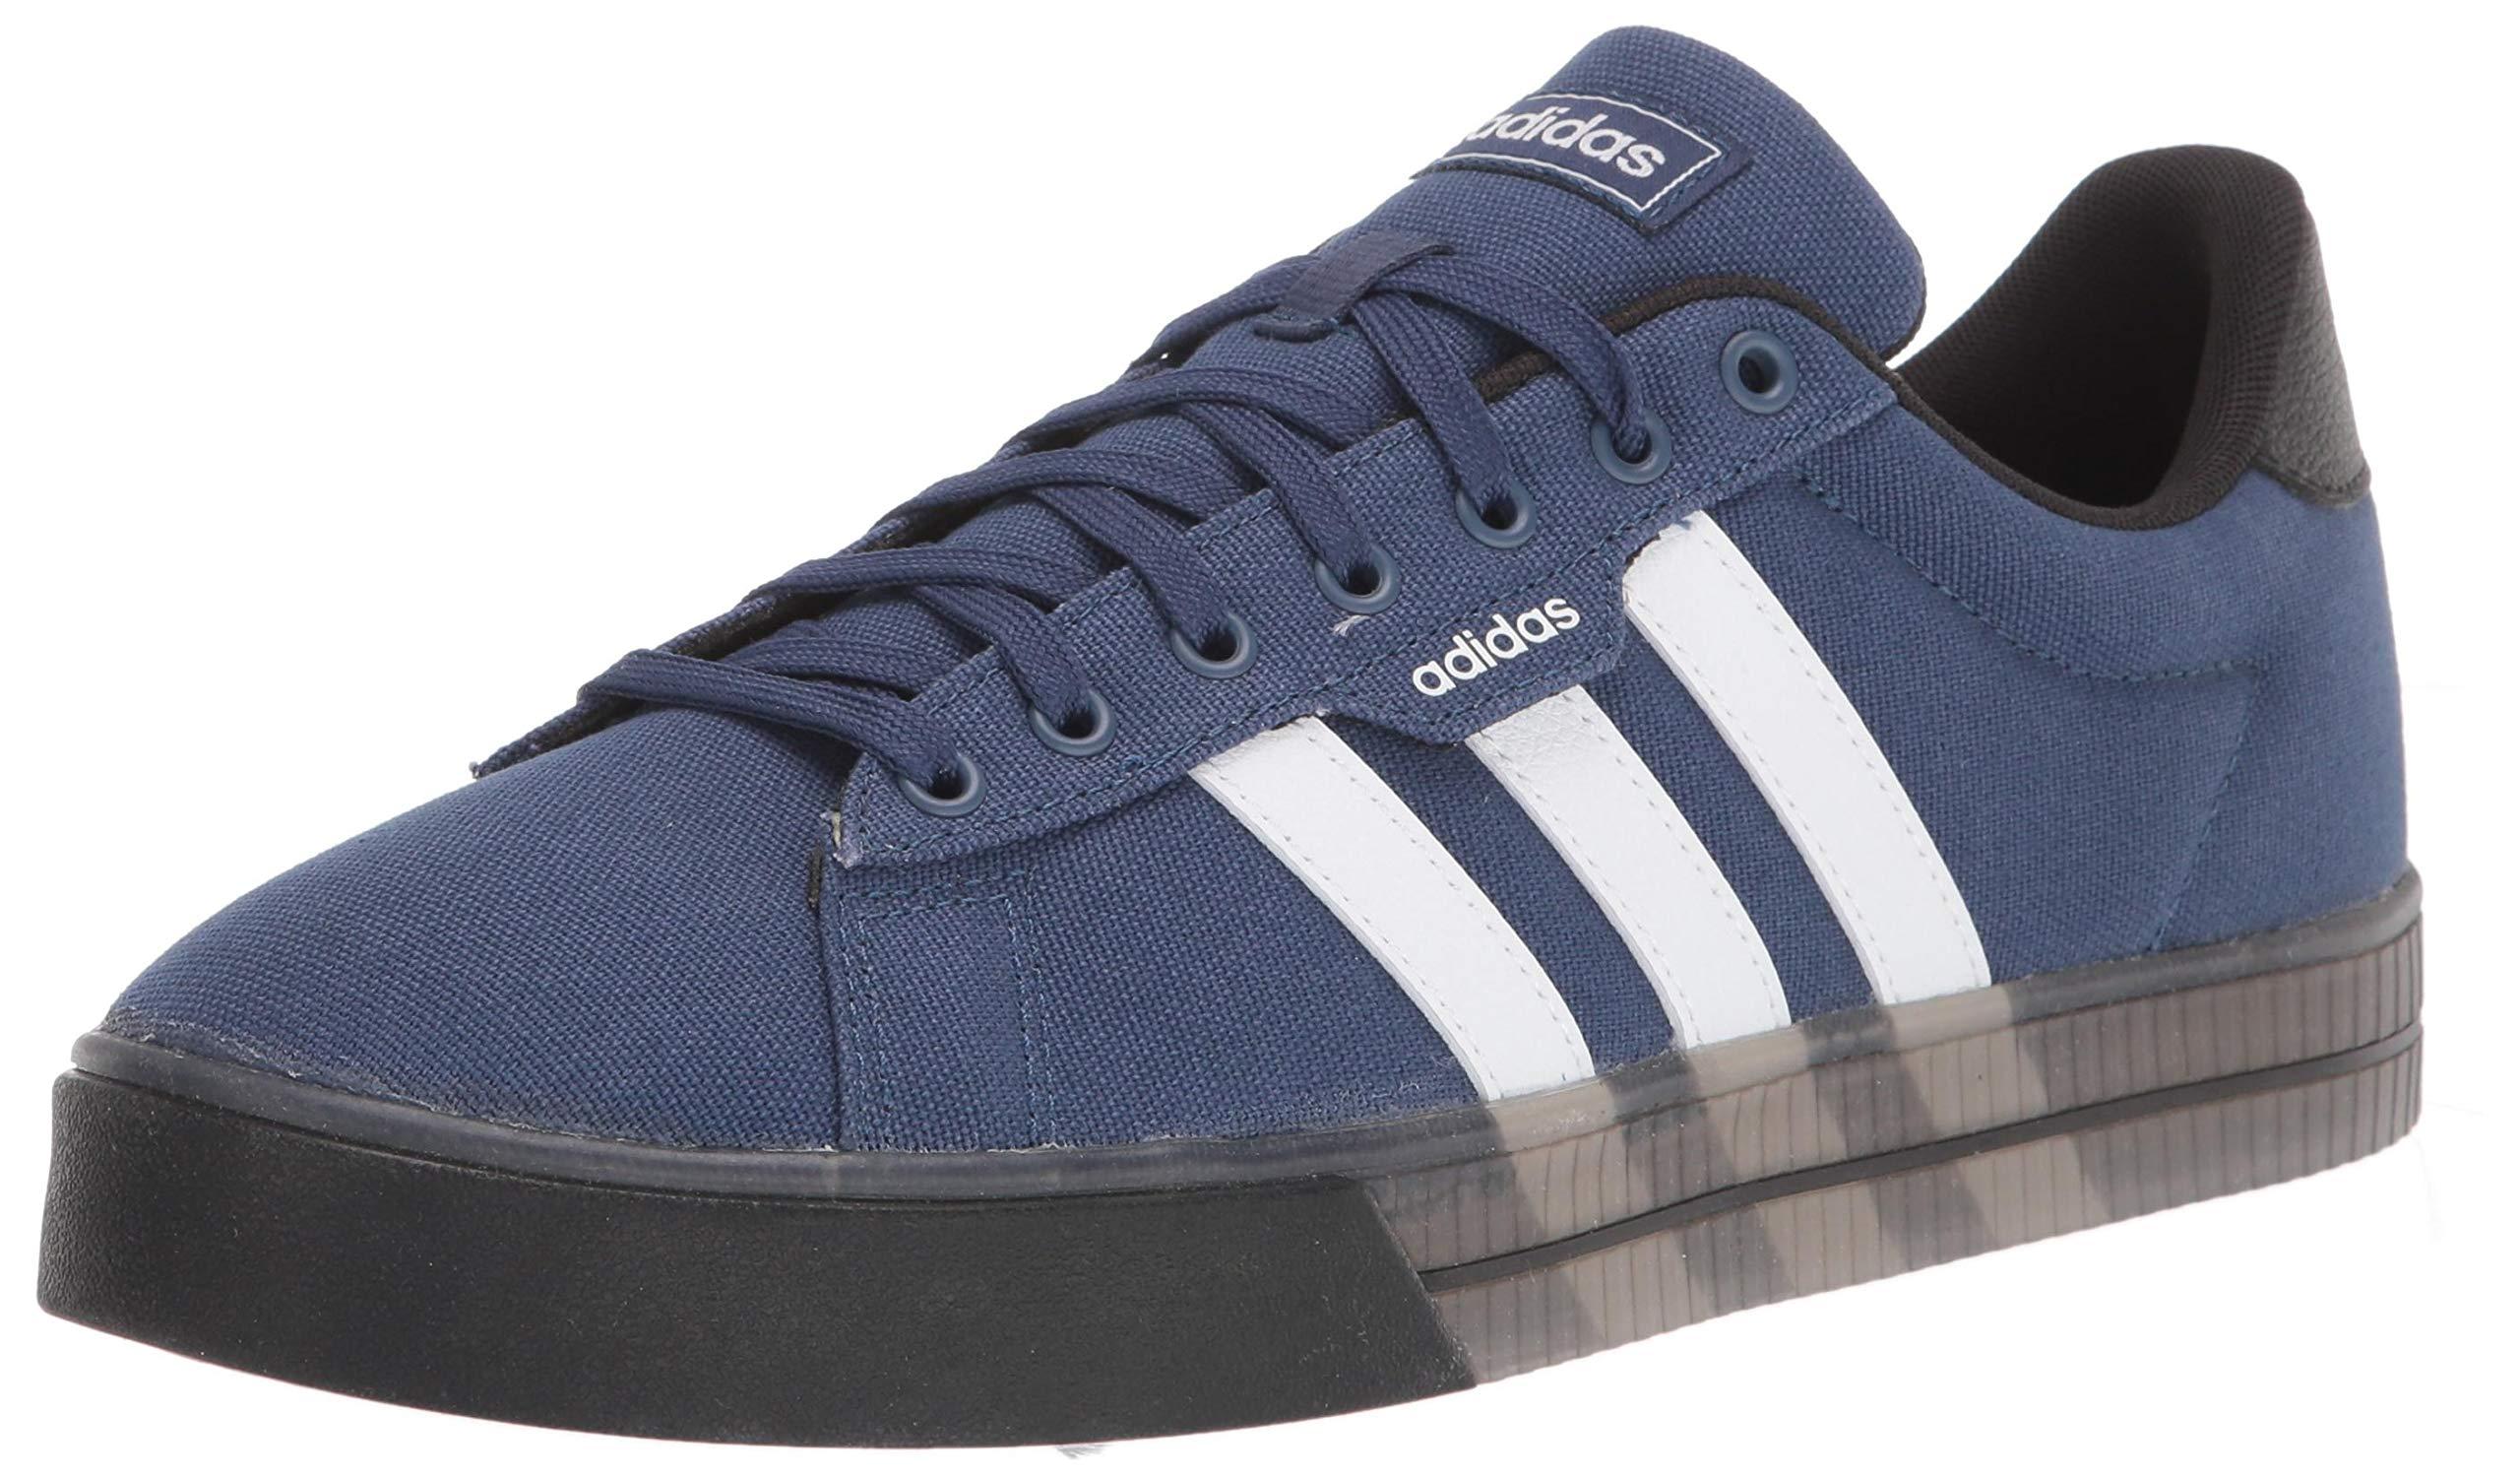 adidas Daily 3.0 Skate Shoe in Black/White/Black (Blue) for Men - Save 62%  | Lyst